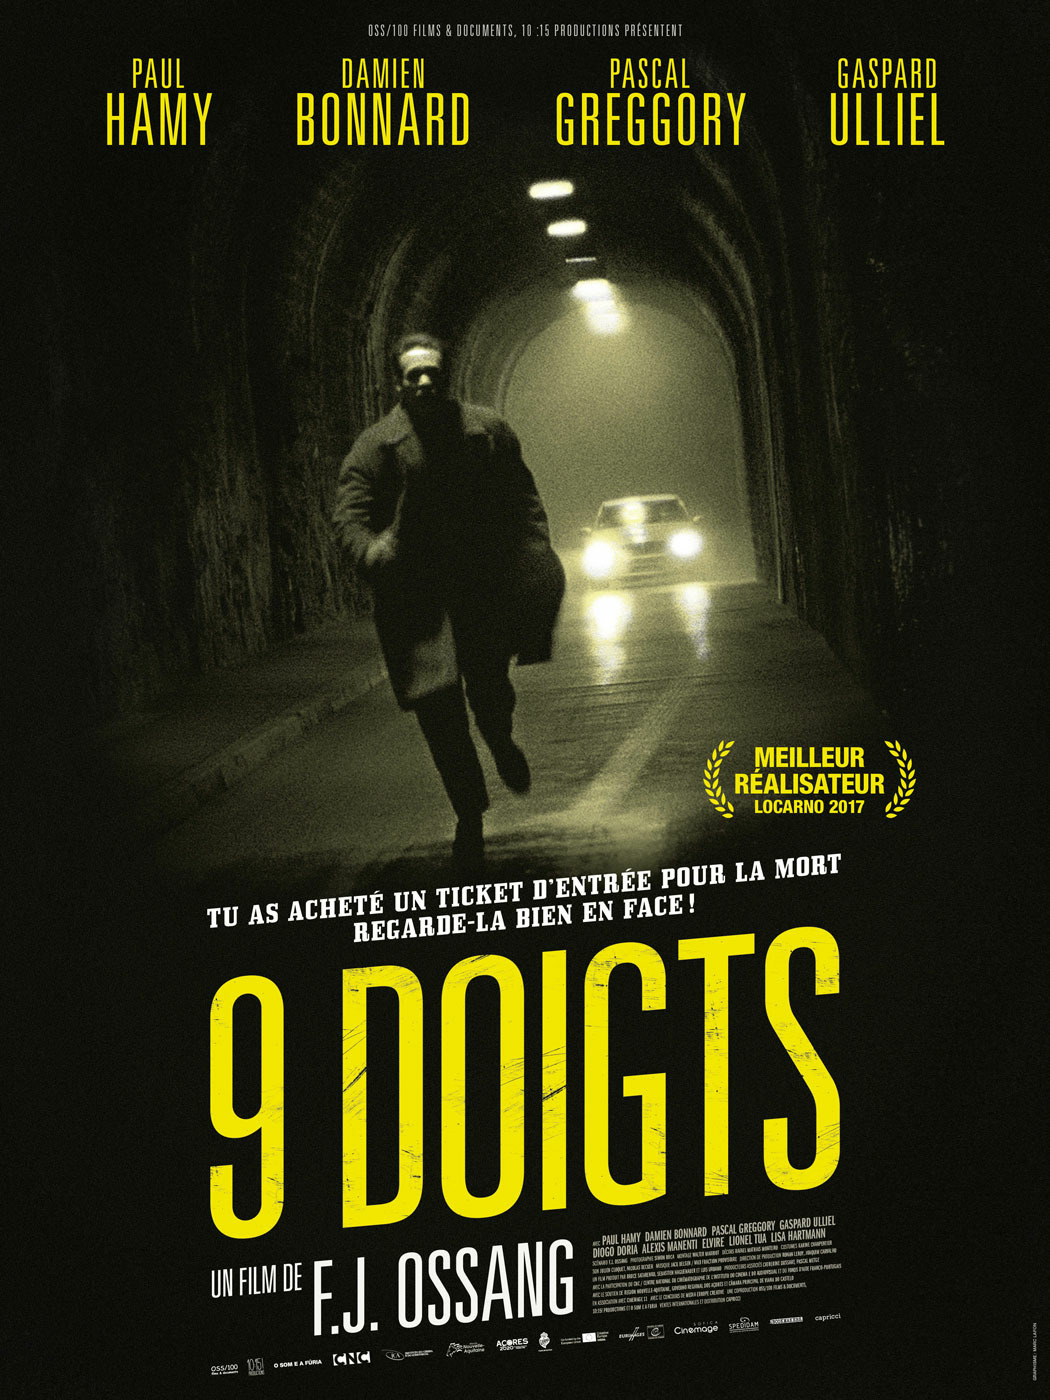 Extra Large Movie Poster Image for 9 doigts 